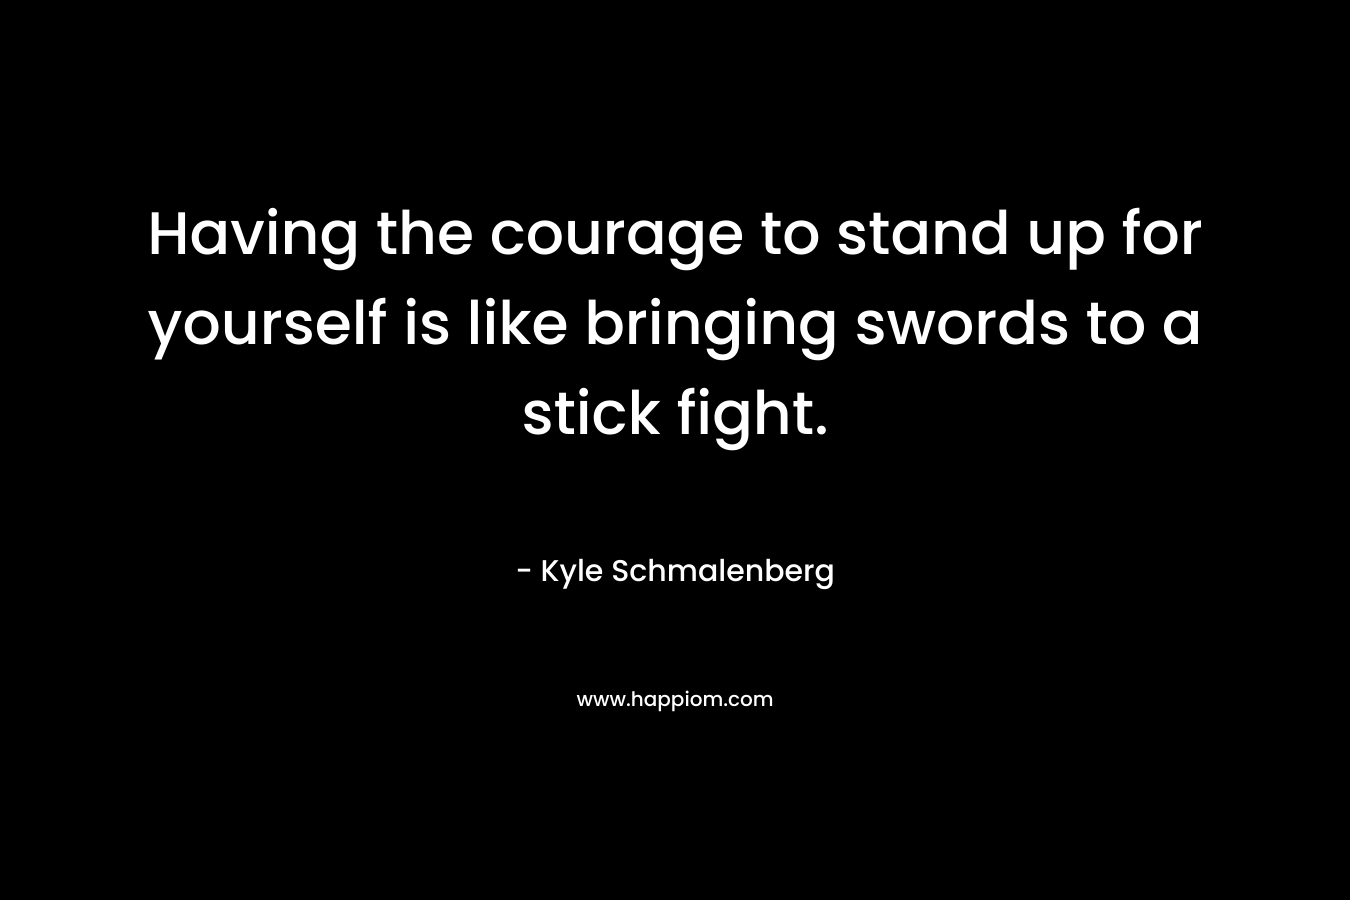 Having the courage to stand up for yourself is like bringing swords to a stick fight.